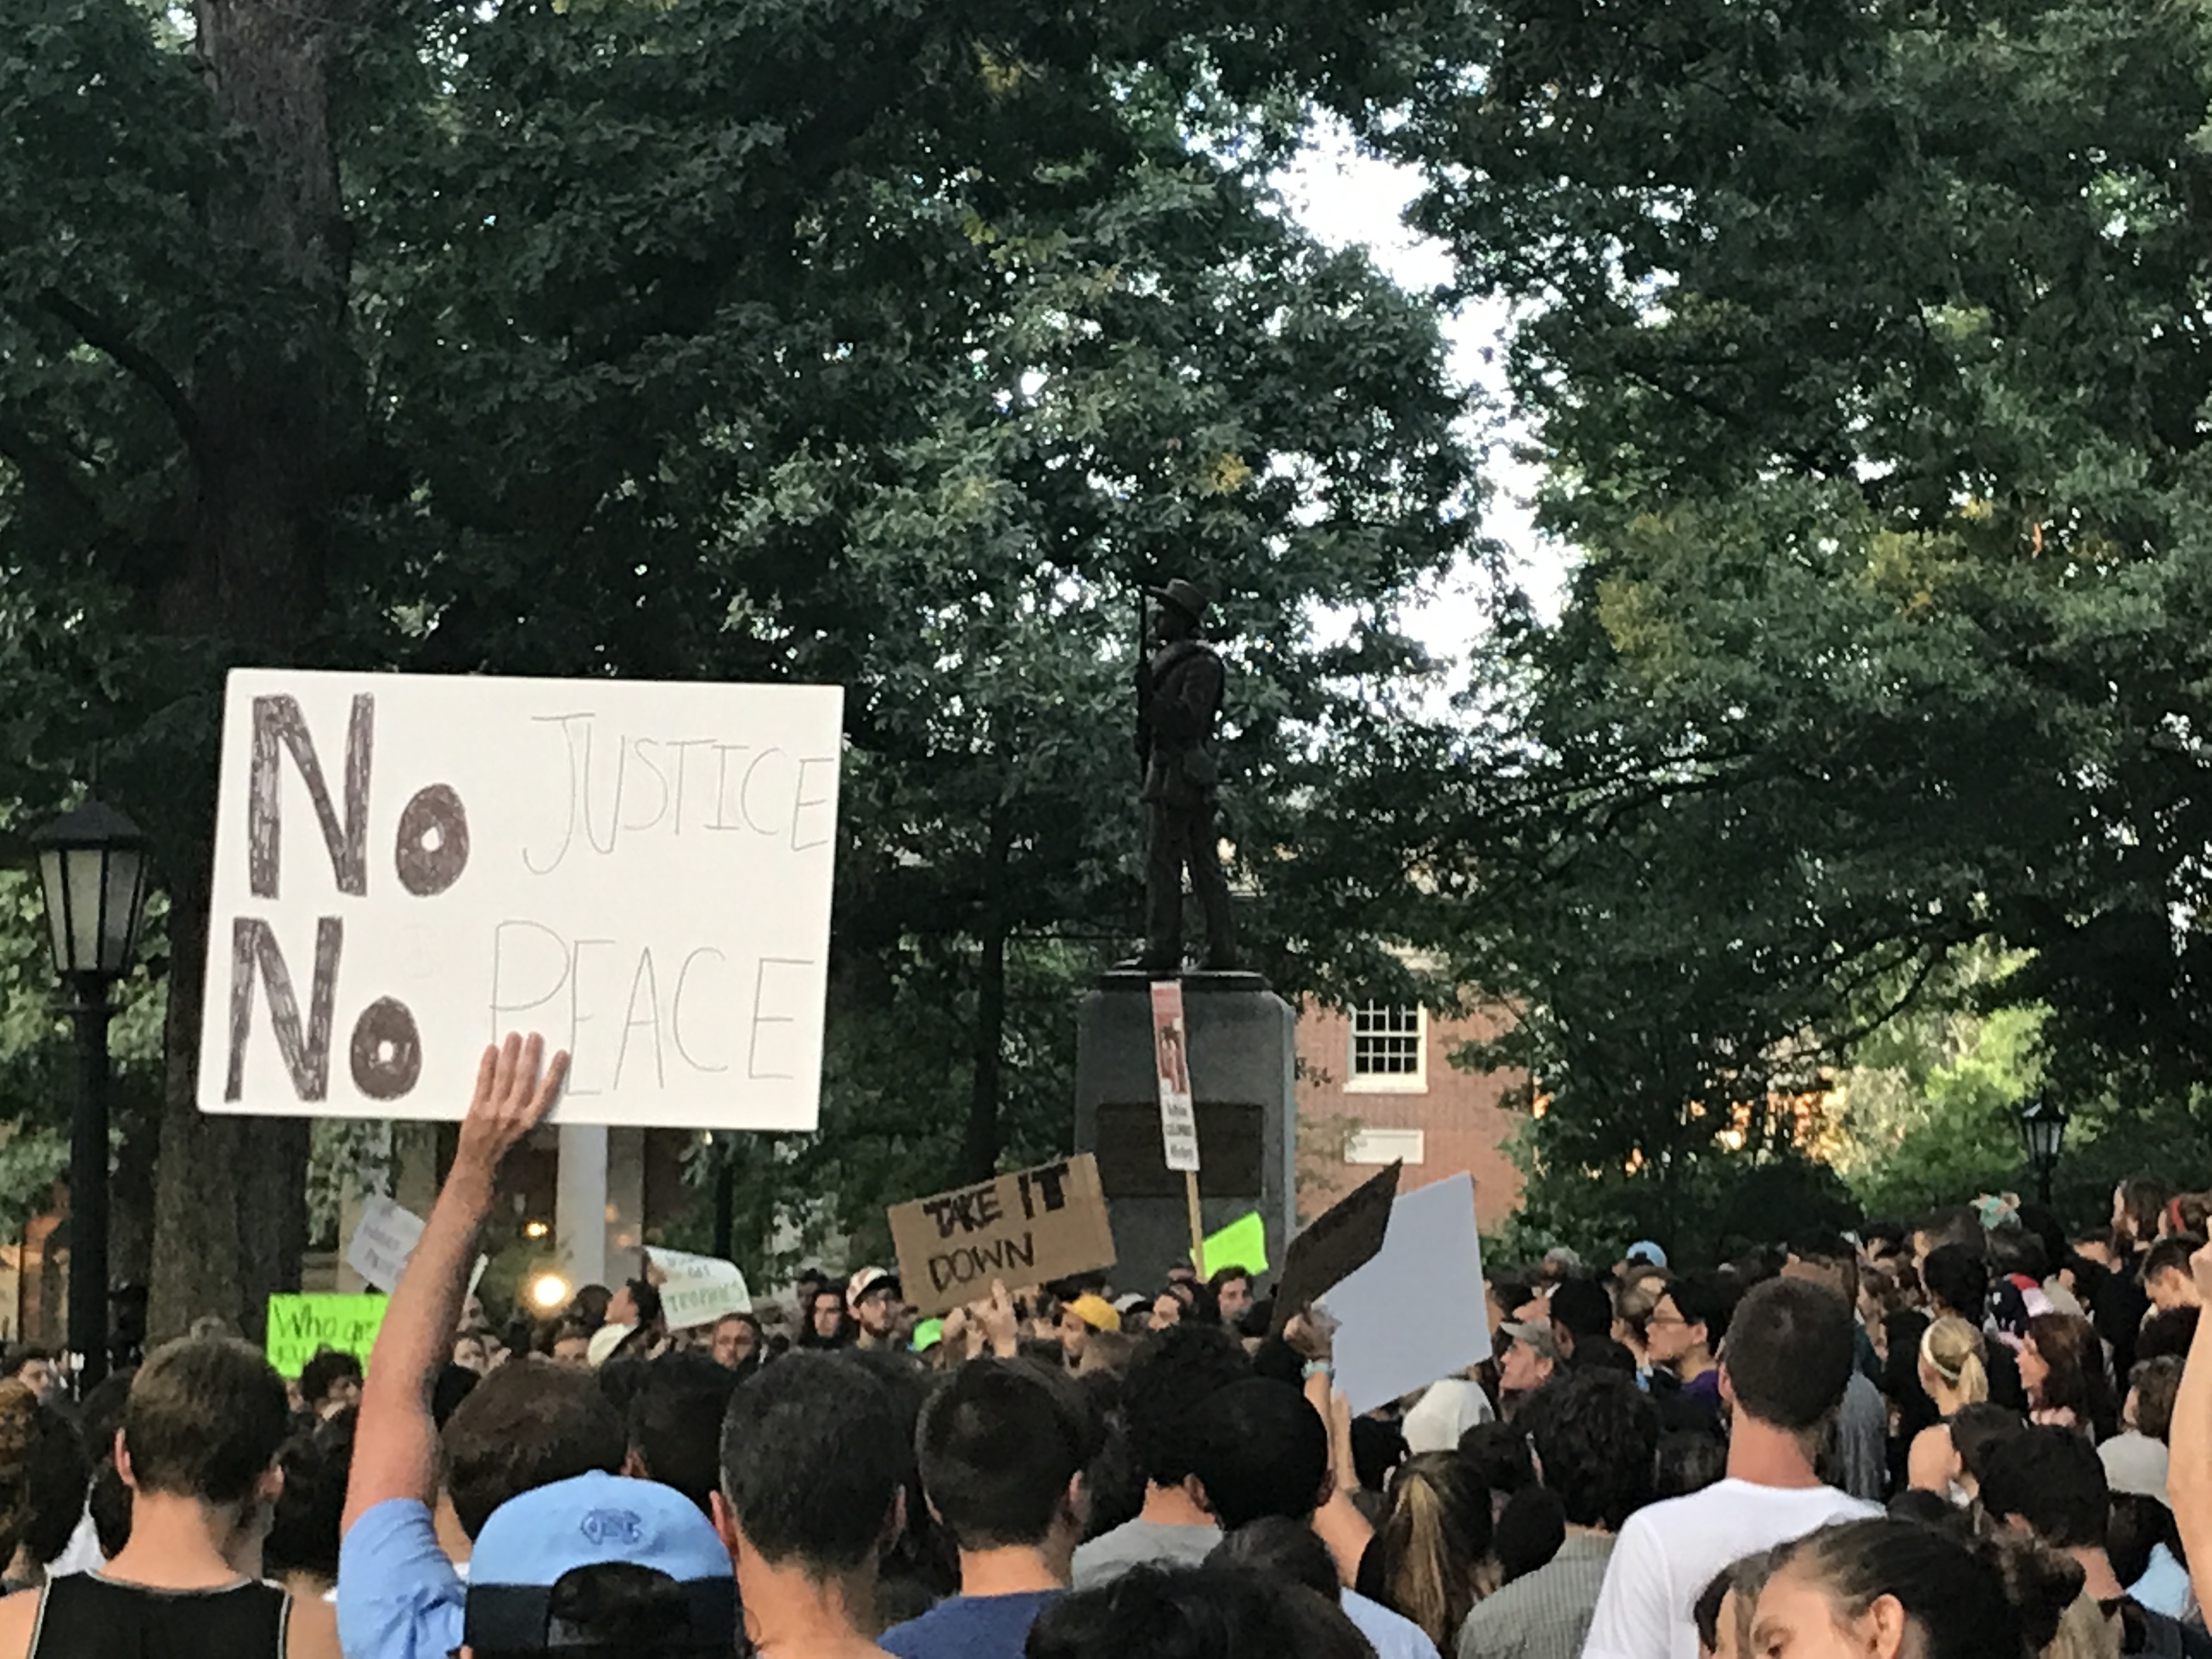 UNC Trustee Allie Ray McCullen Calls Protesters “Entitled Wimps”